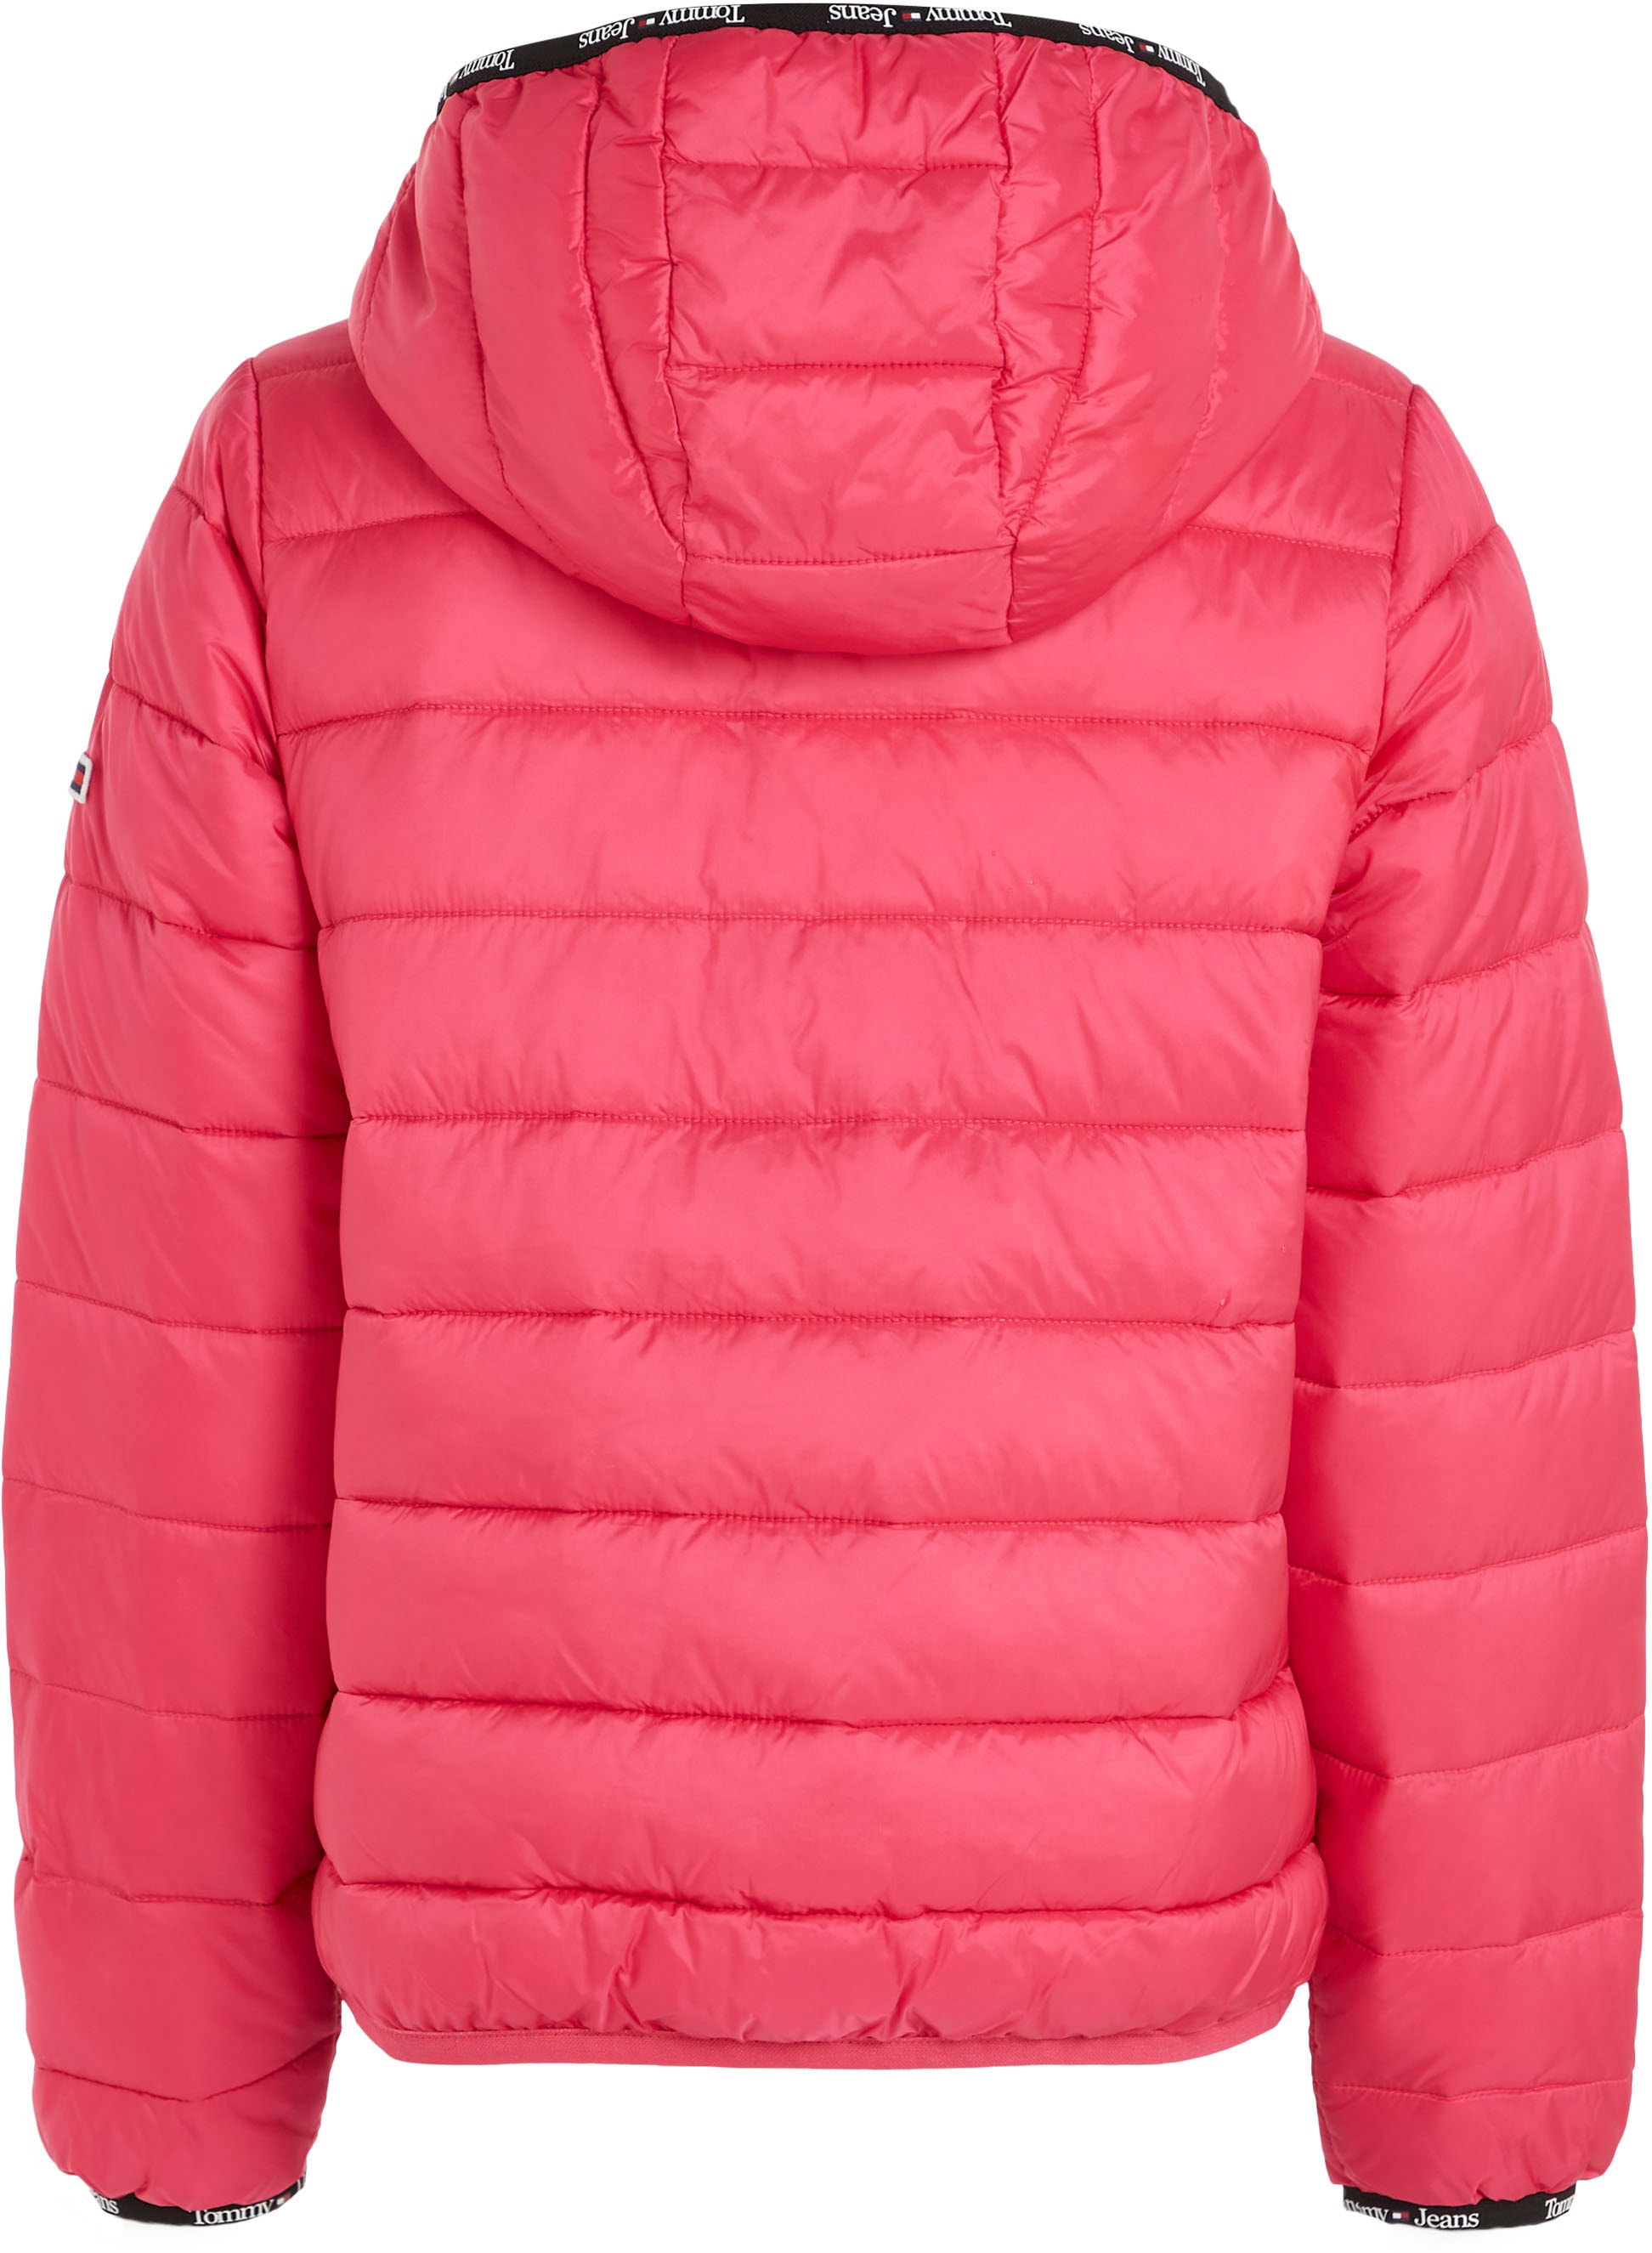 Tommy Jeans Steppjacke »TJW QUILTED OTTOversand bei TAPE Branding-Bündchen Tommy Jeans mit mit Kapuze, JACKET«, HOODED